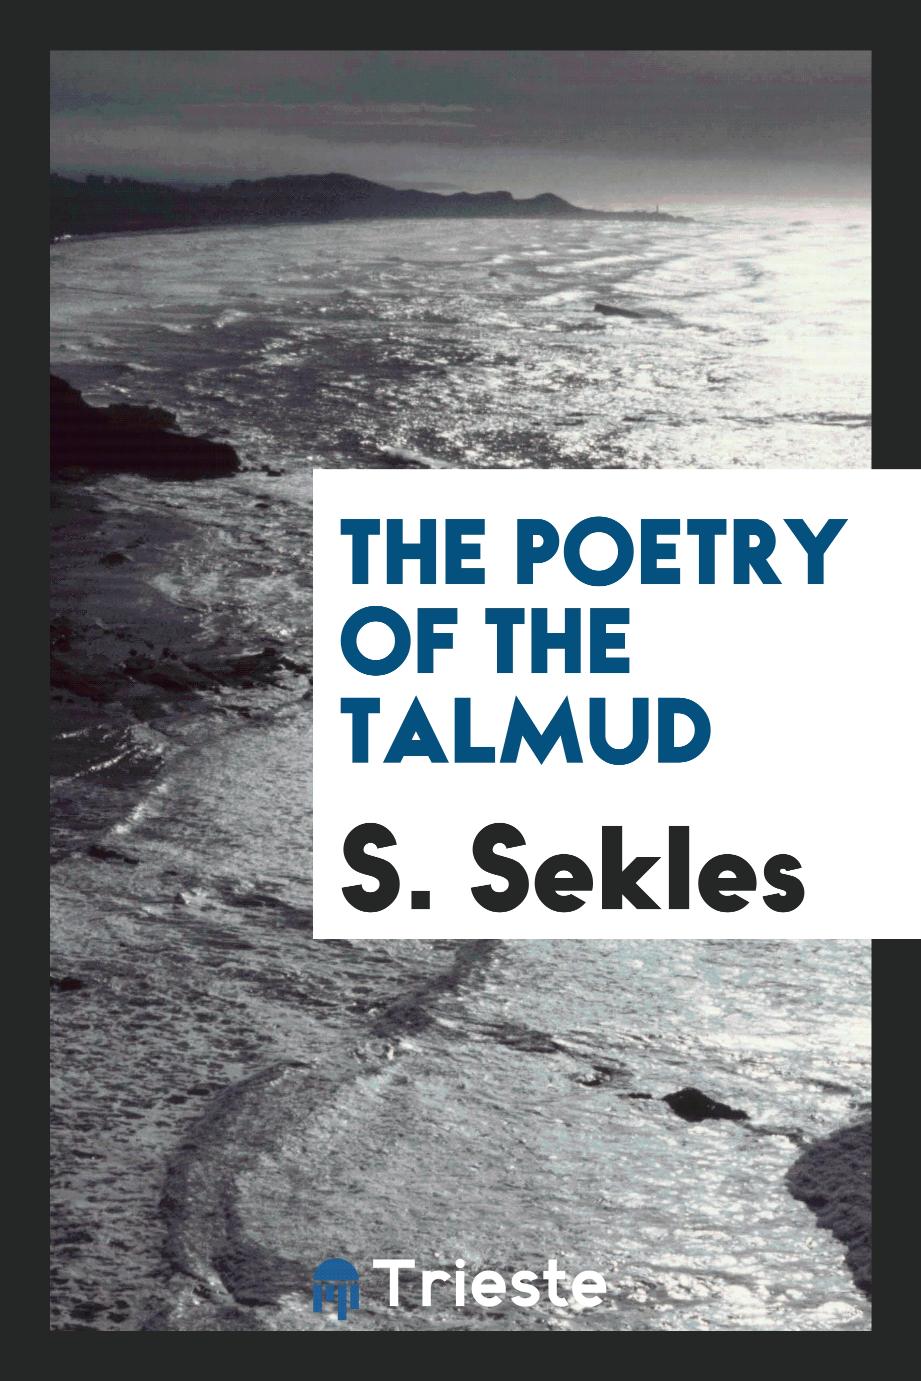 The poetry of the Talmud